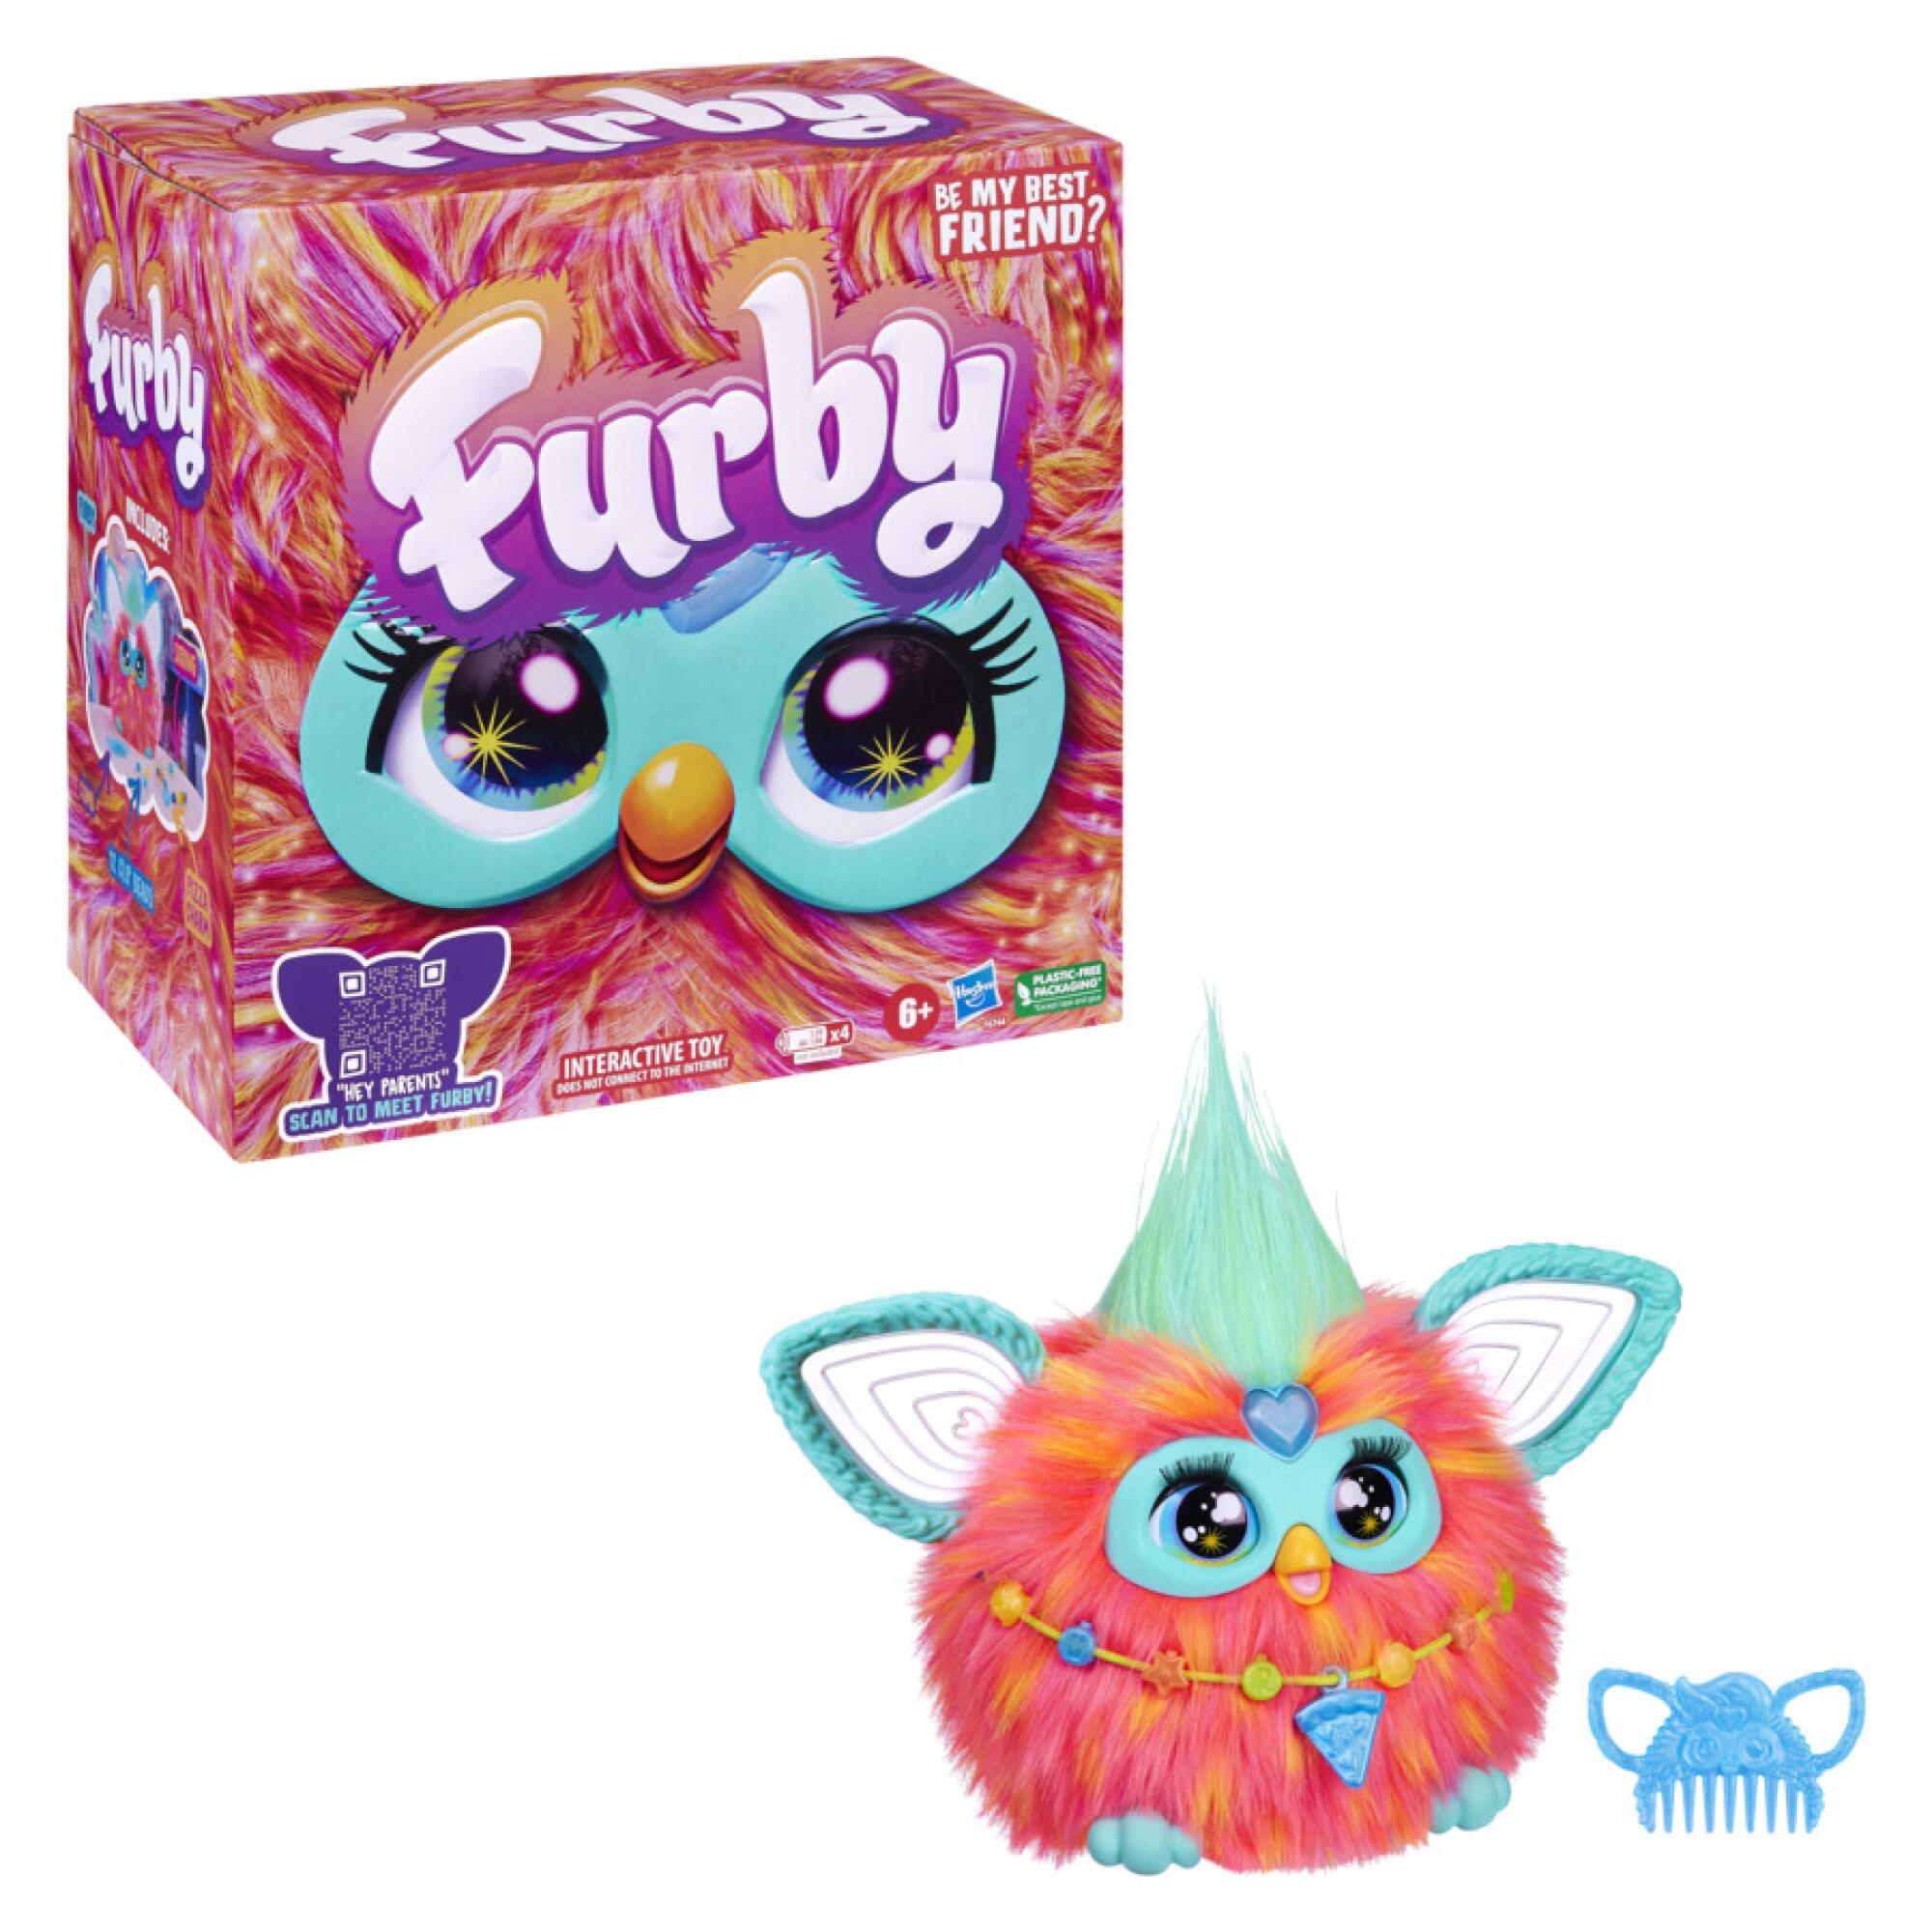 The all-new Furby responds to hugs, pats on the head, shakes and feeding it a pretend pizza charm.